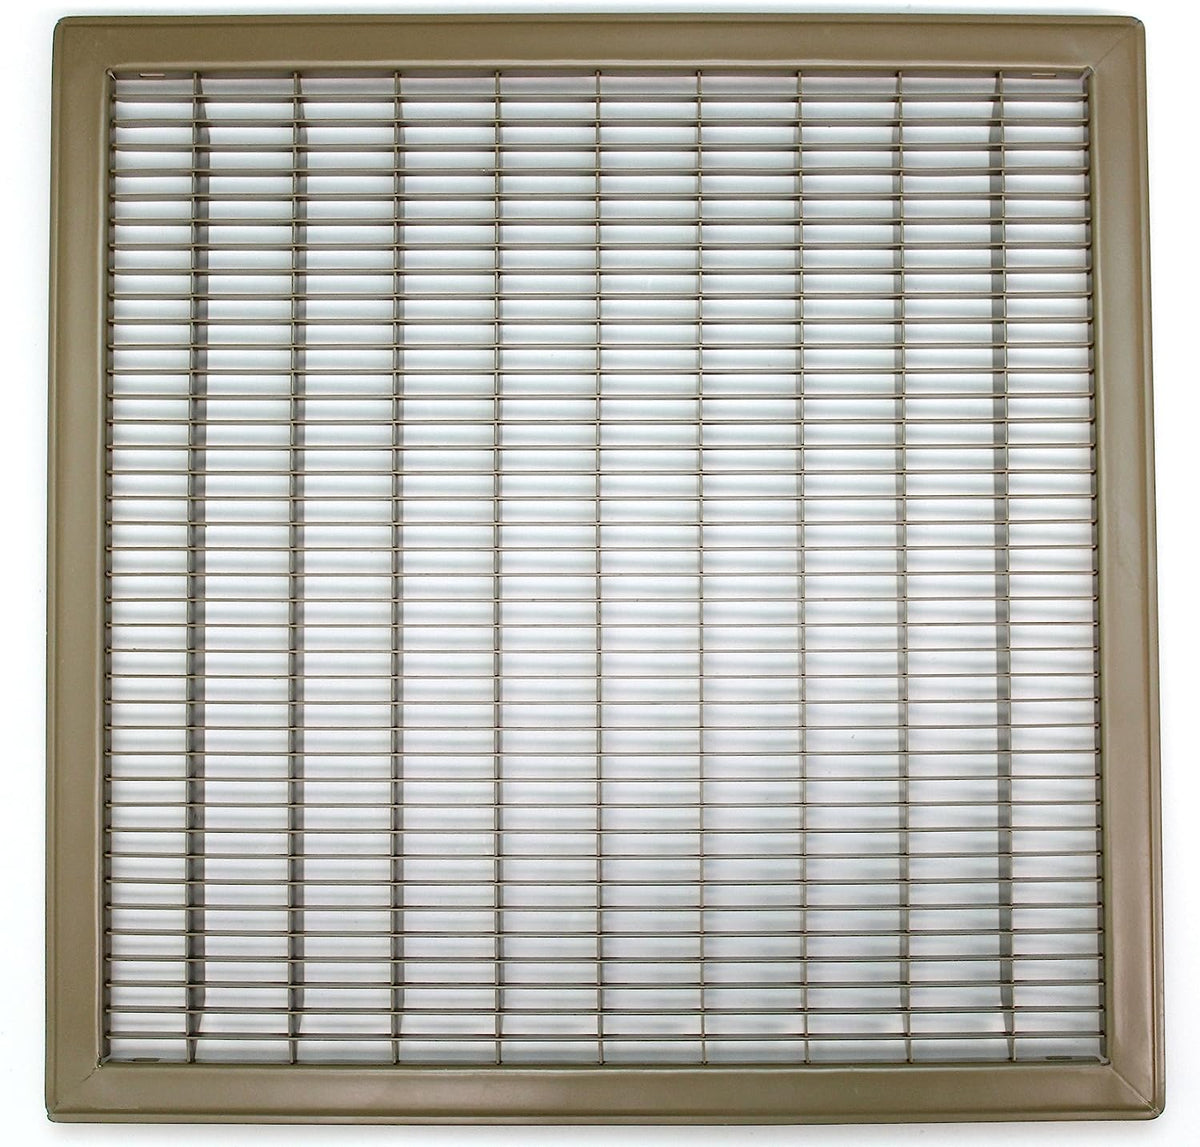 20&quot; X 25&quot; Or 25&quot; X 20&quot; Heavy Duty Floor Grille - Fixed Blades Air Grille - Brown [Outer Dimensions: 21.75 X 26.75]